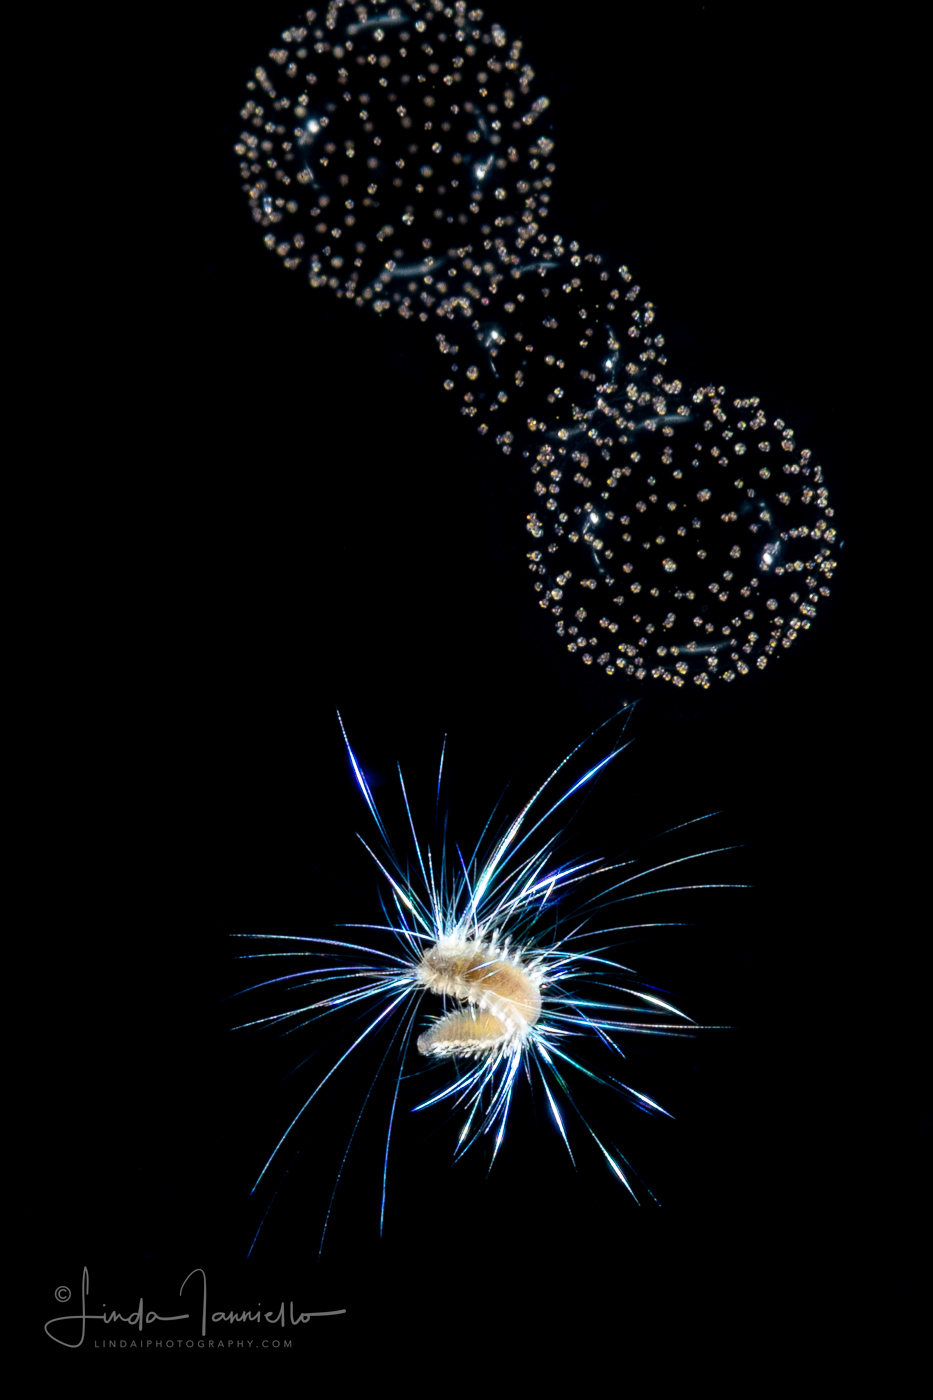 Polychaete Worm - Spionidae Family - With a Radiolarian Colony